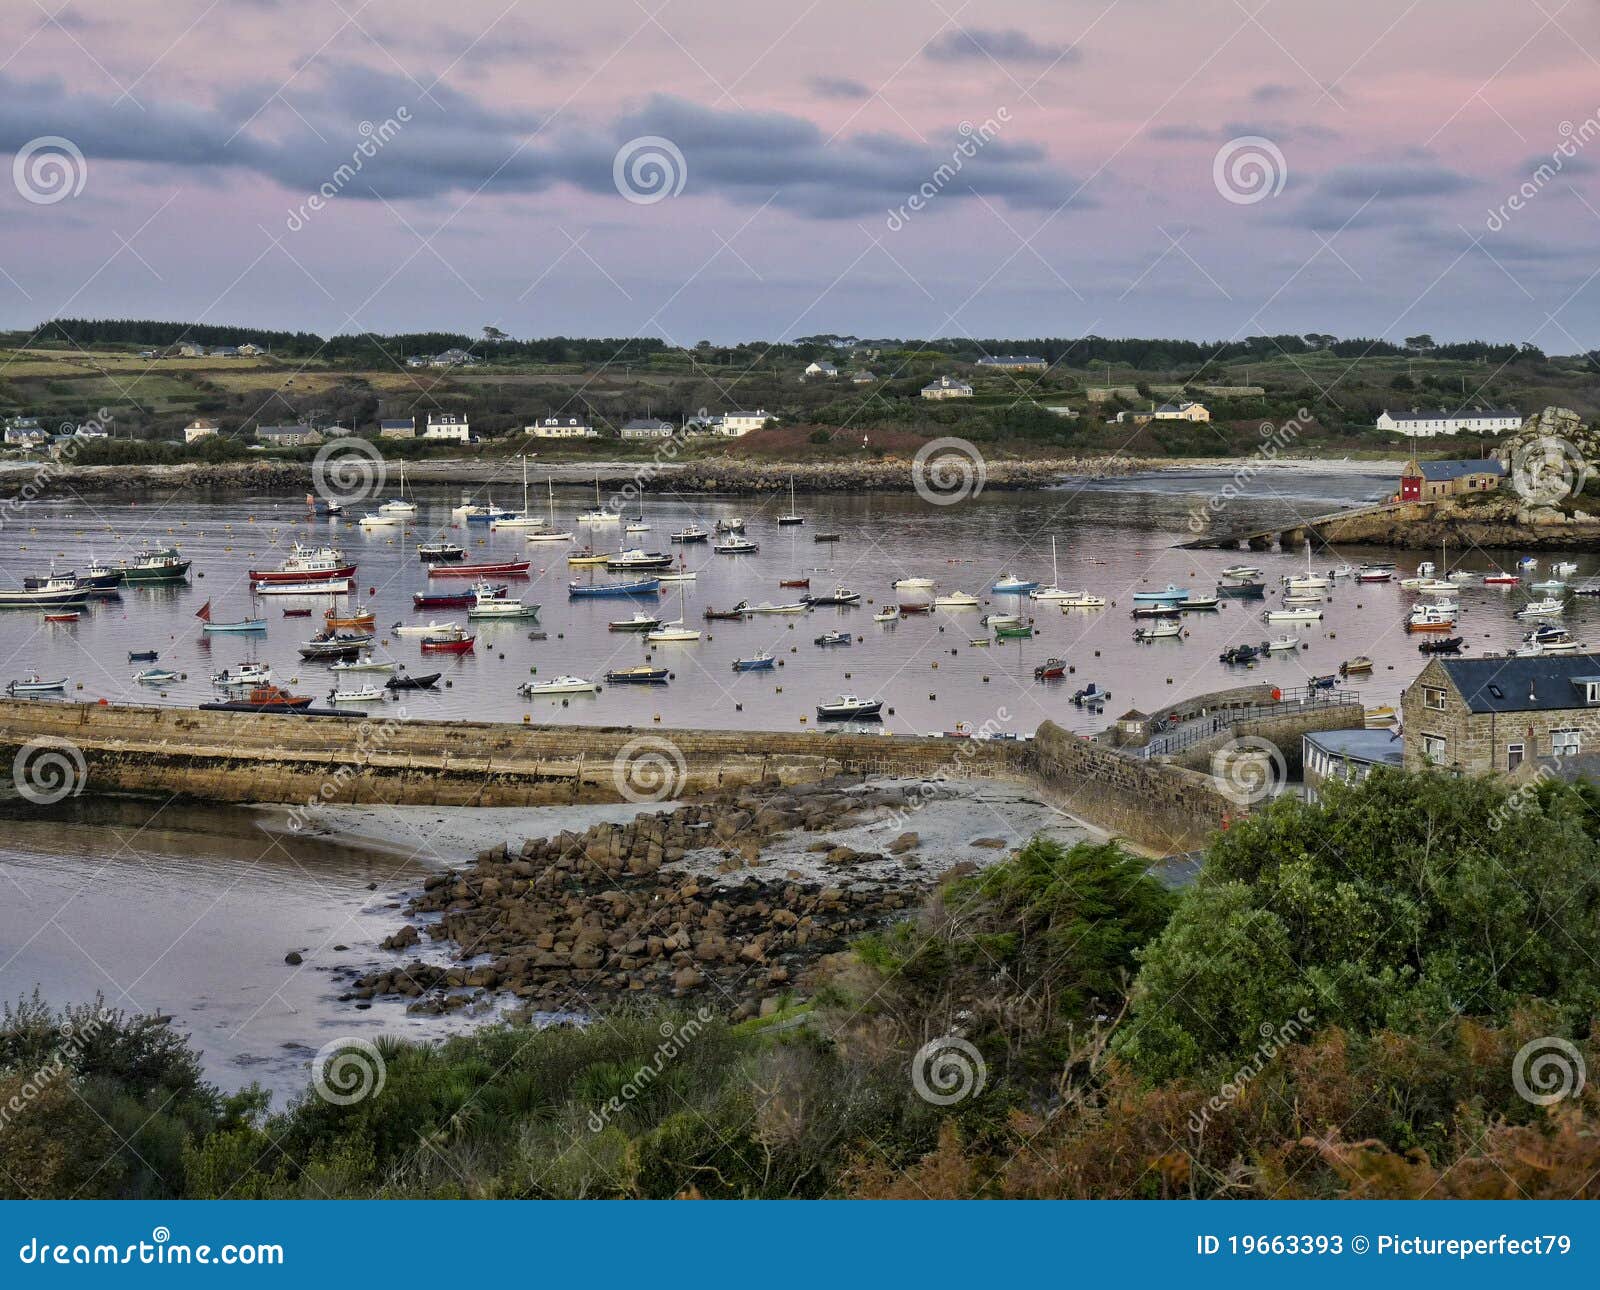 st marys harbour - isles of scilly